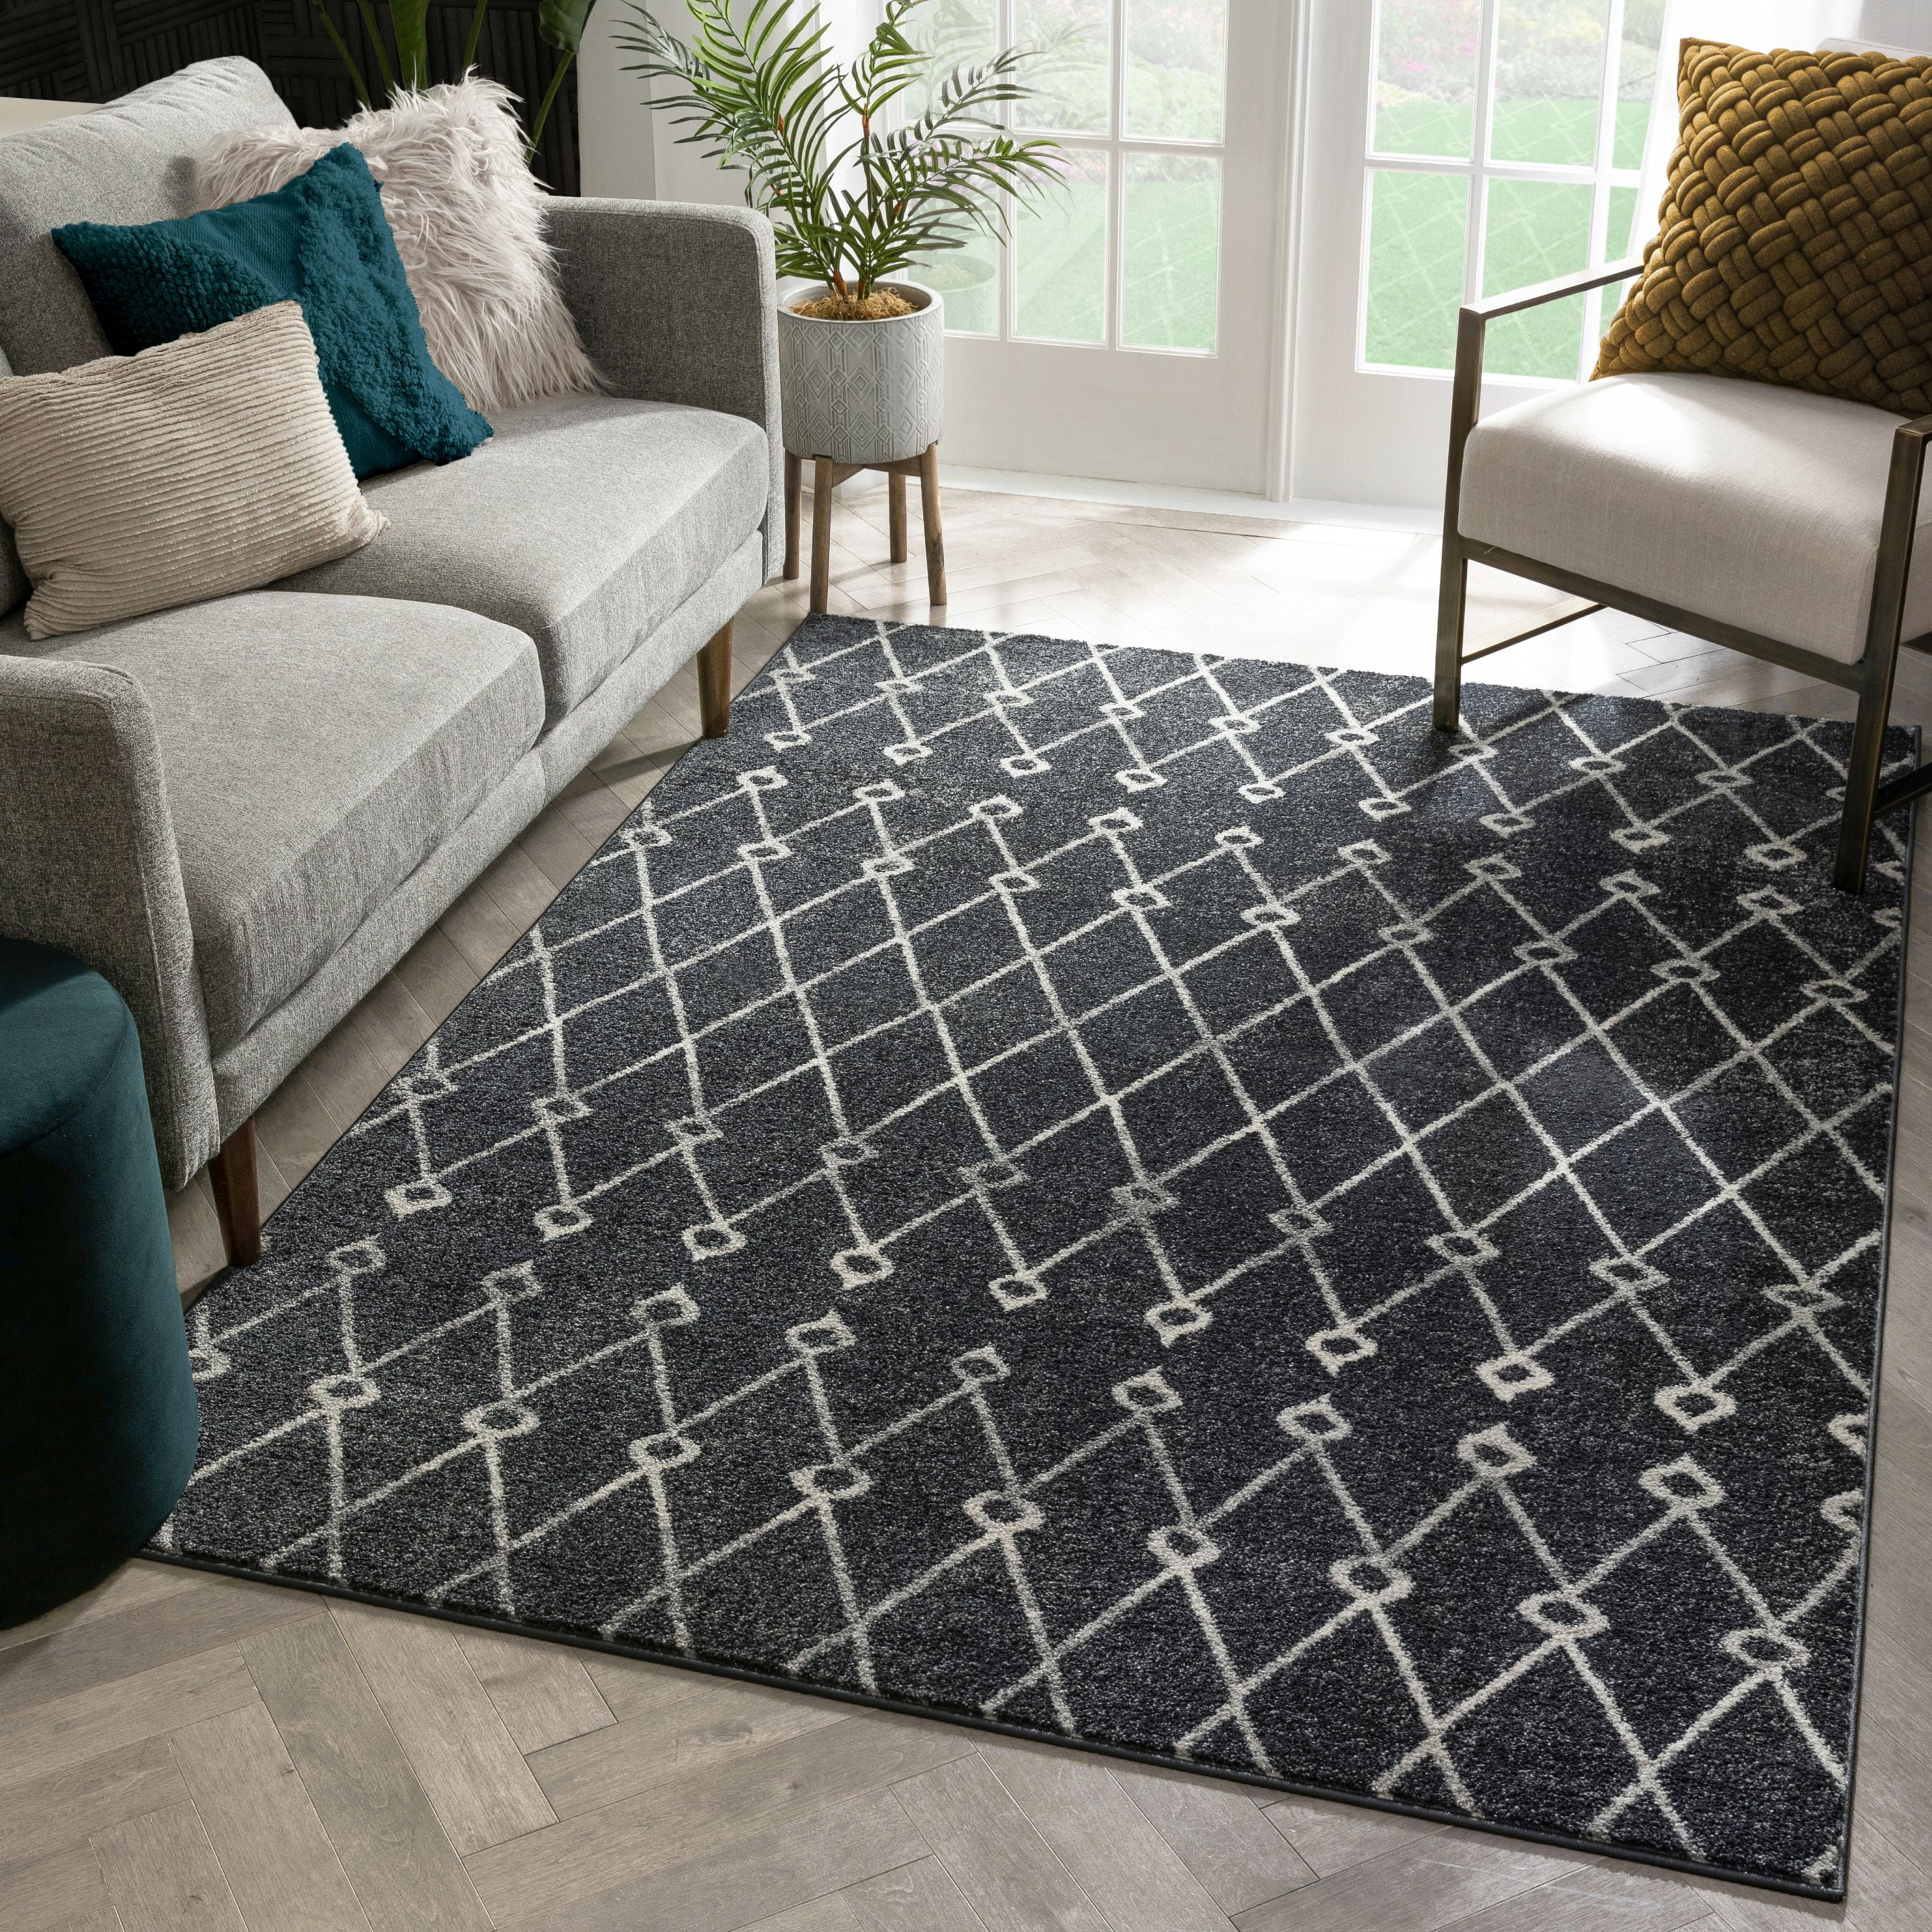 Distressed Grey Trellis Rug Small large Transitional Moroccan Living Room Rugs 